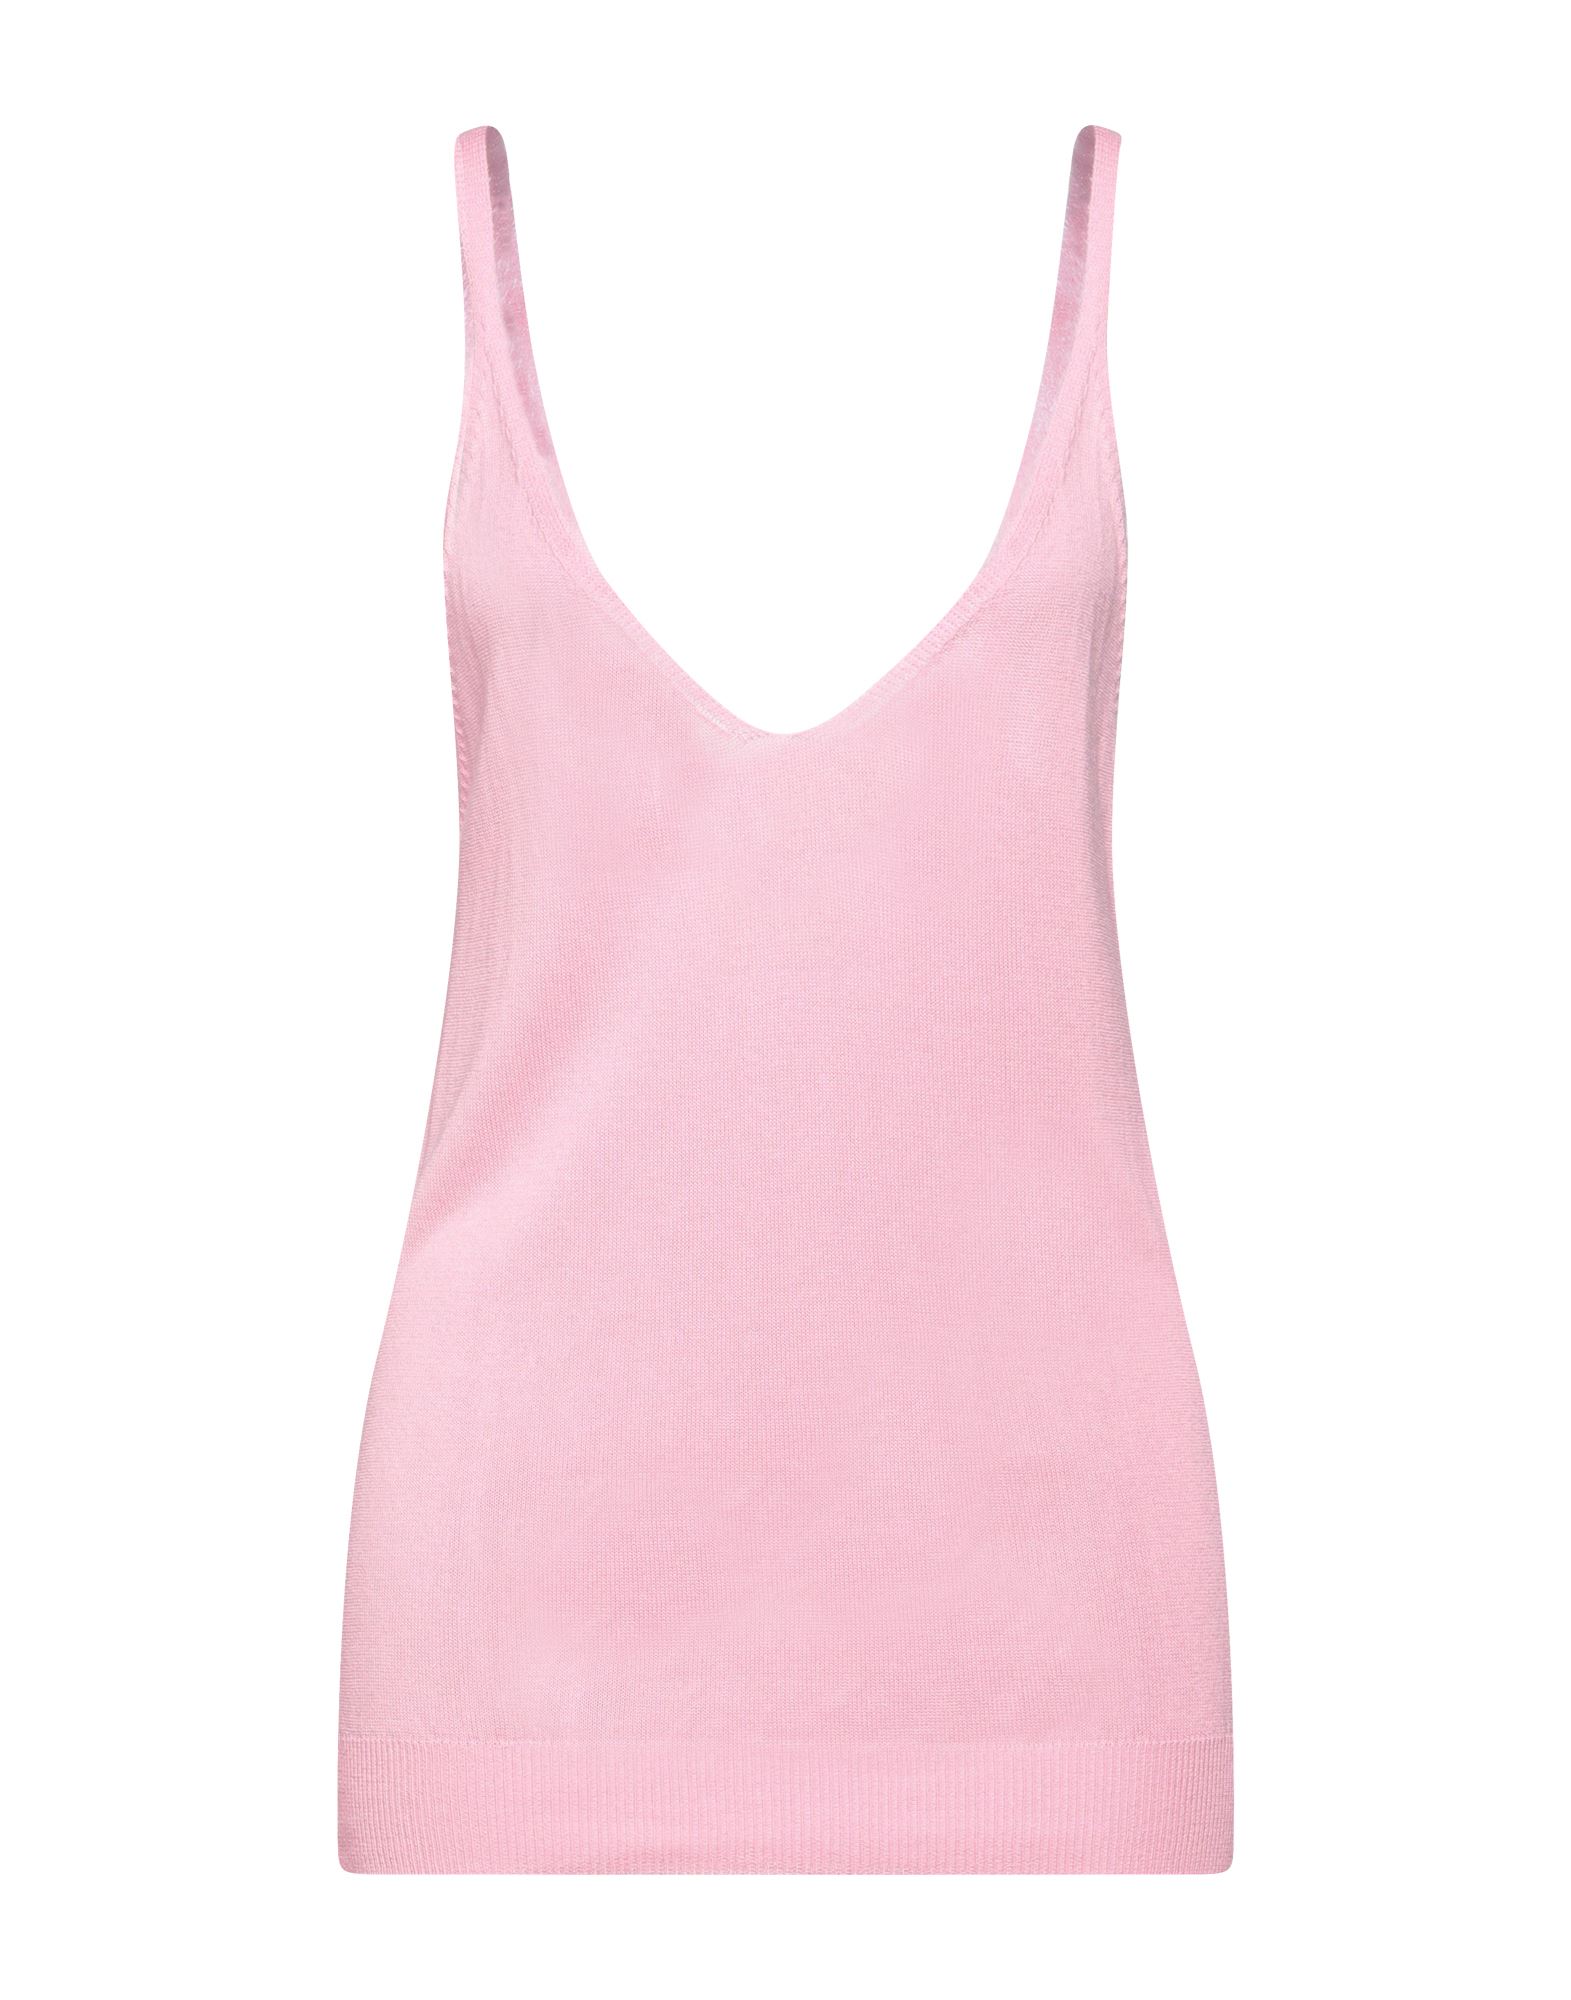 N.o.w. Andrea Rosati Cashmere Tops In Pink